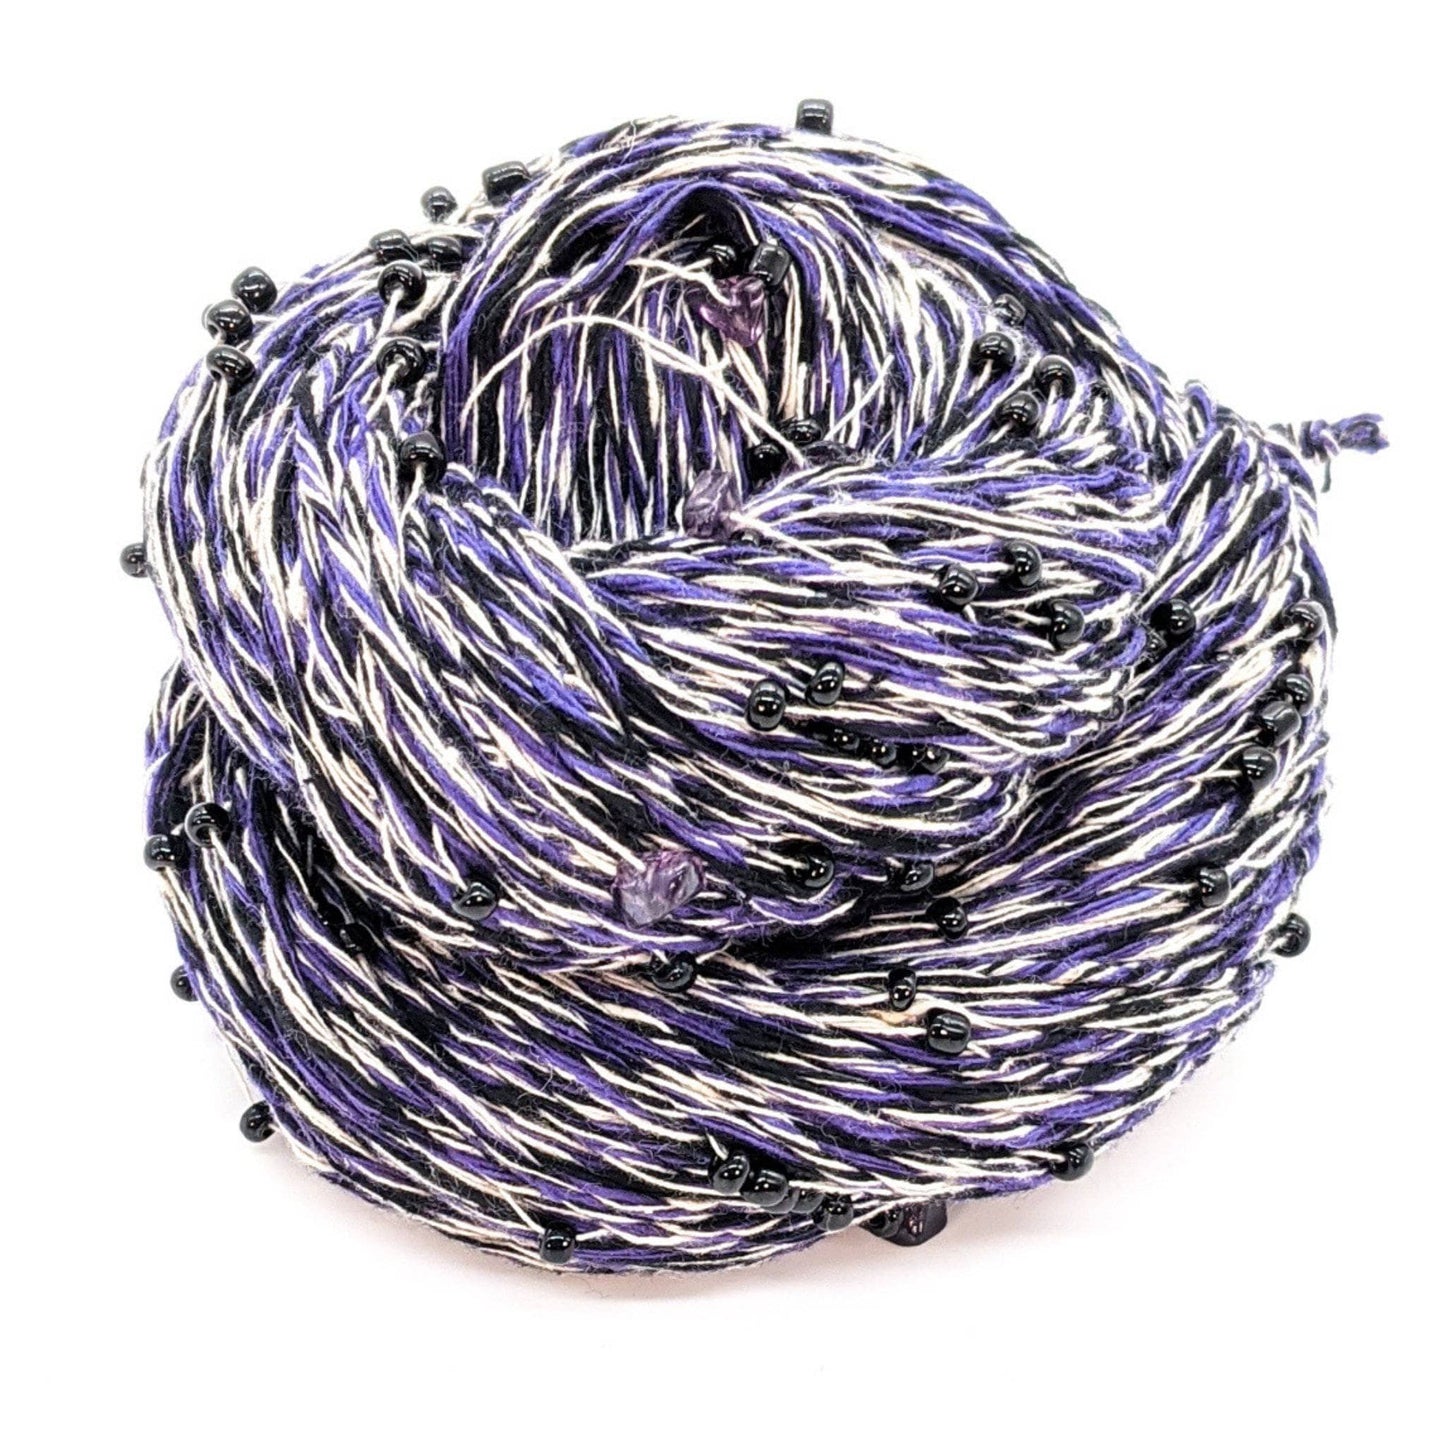 A skein of purple, black and white beaded yarn on a white background